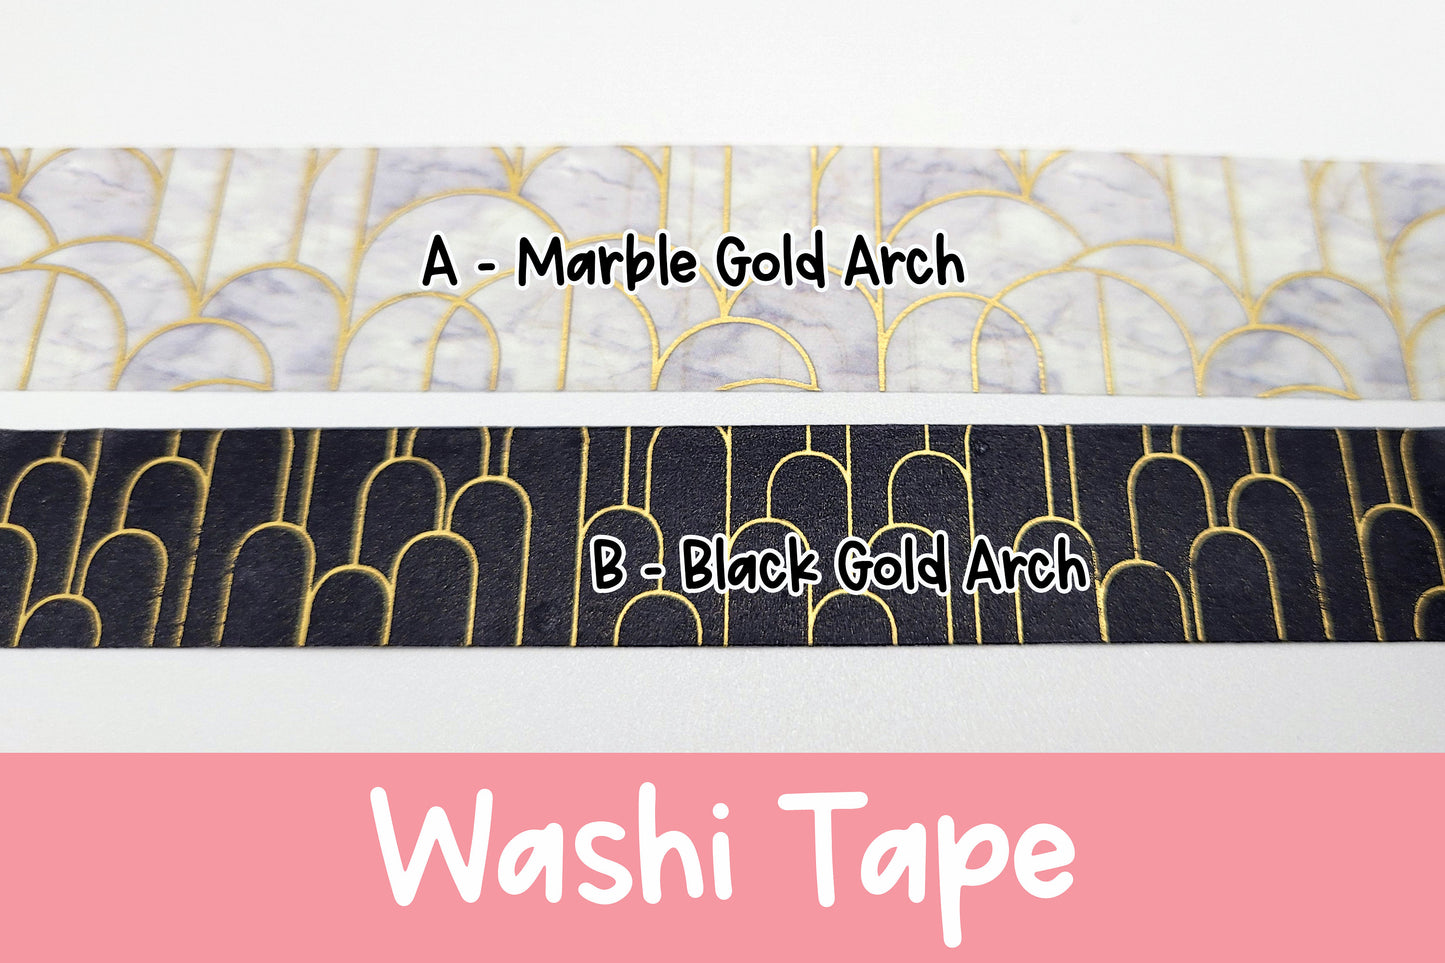 Gold Arch Washi Tape | 15mm Black Gold Arch | 20mm Marble Gold Arch | Gold Foil Decorative Tape | Planner | Bujo | Stationery